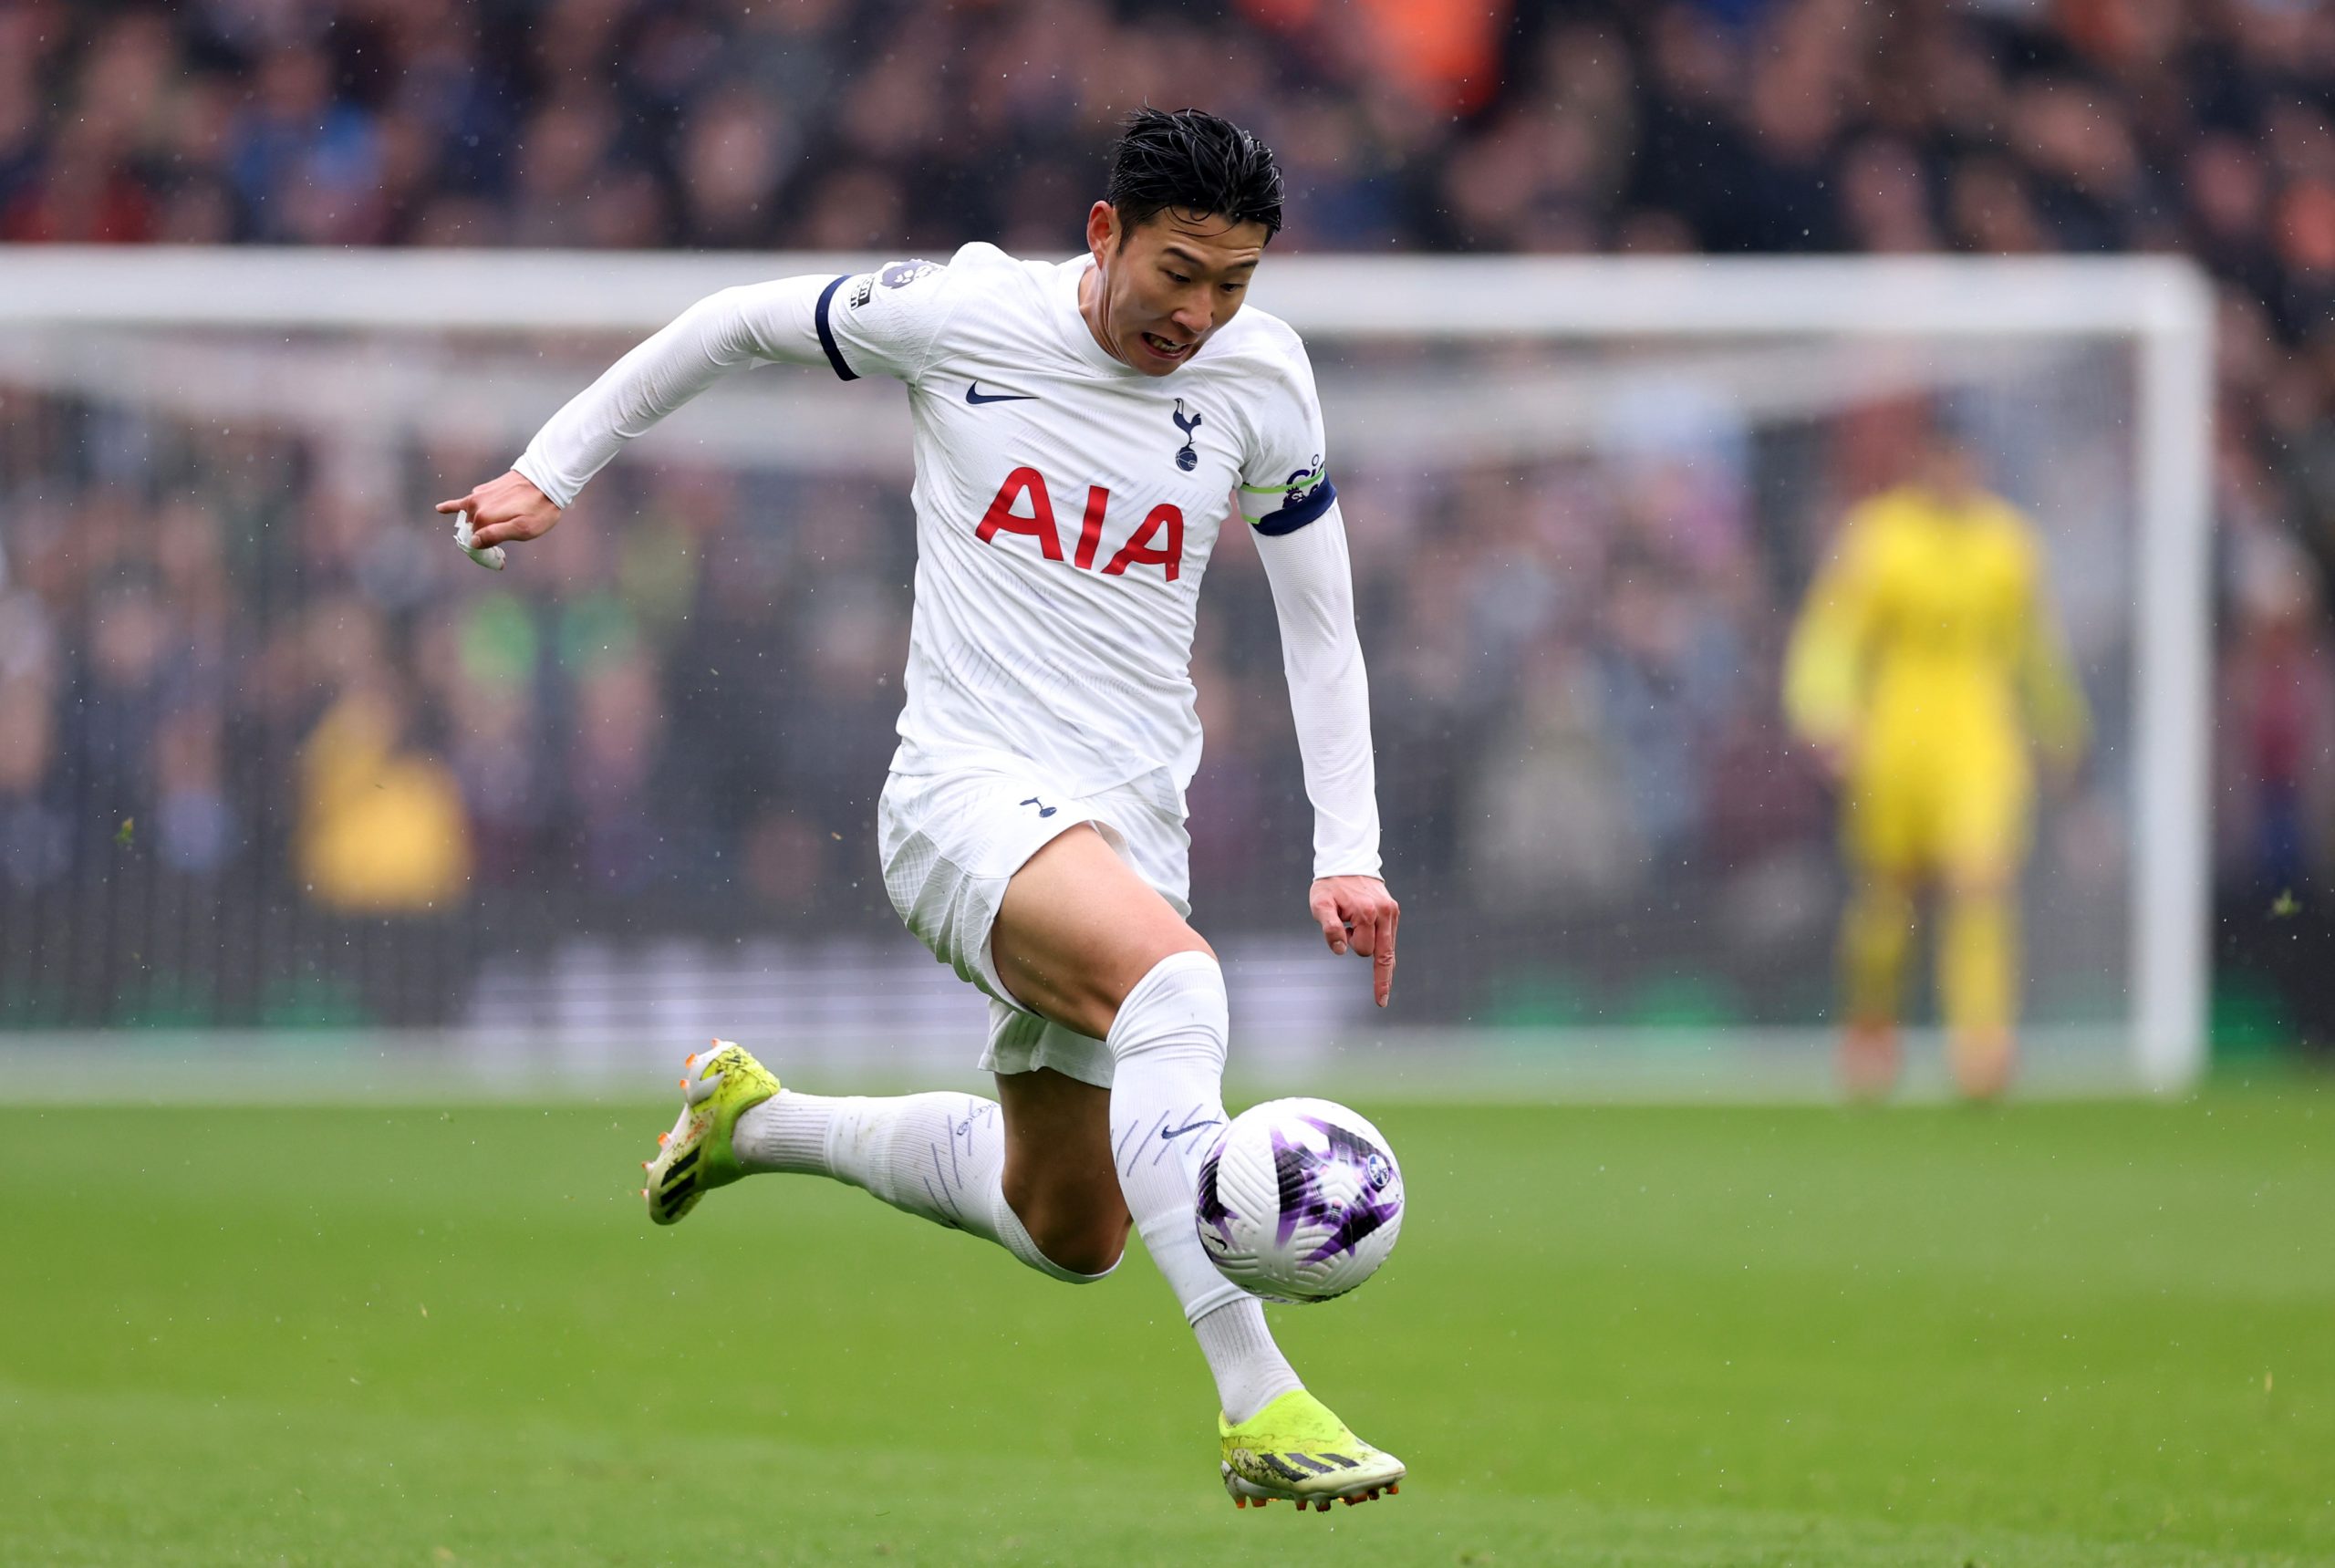 Mikel Arteta talks about uncharacteristic Son Heung-min miss in Manchester City clash